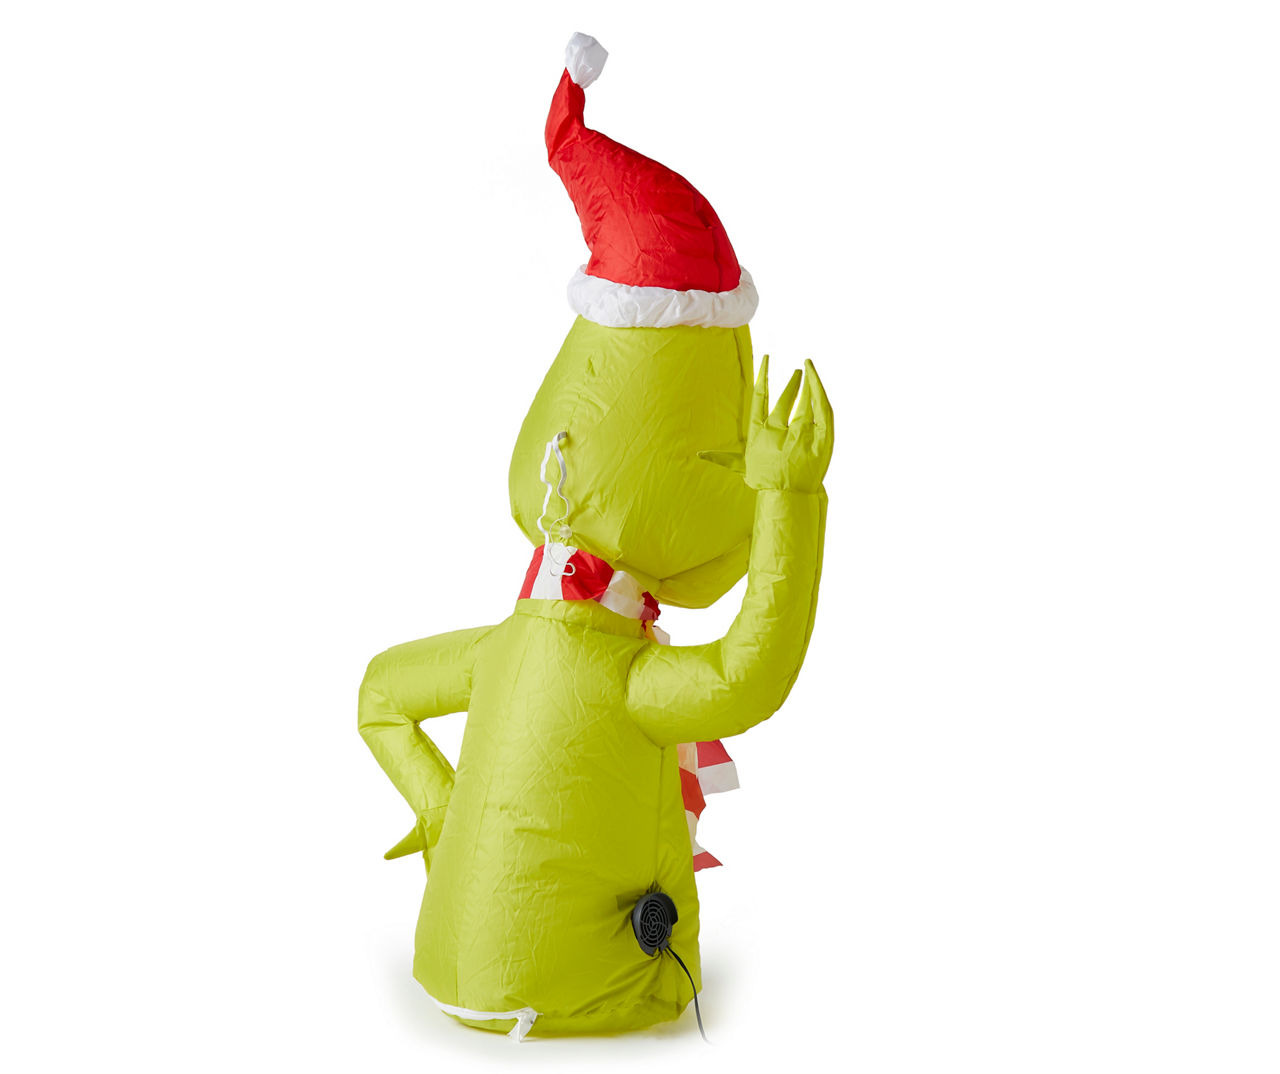 For The Carpool Lane: An Inflatable Grinch Car Passenger - borninspace